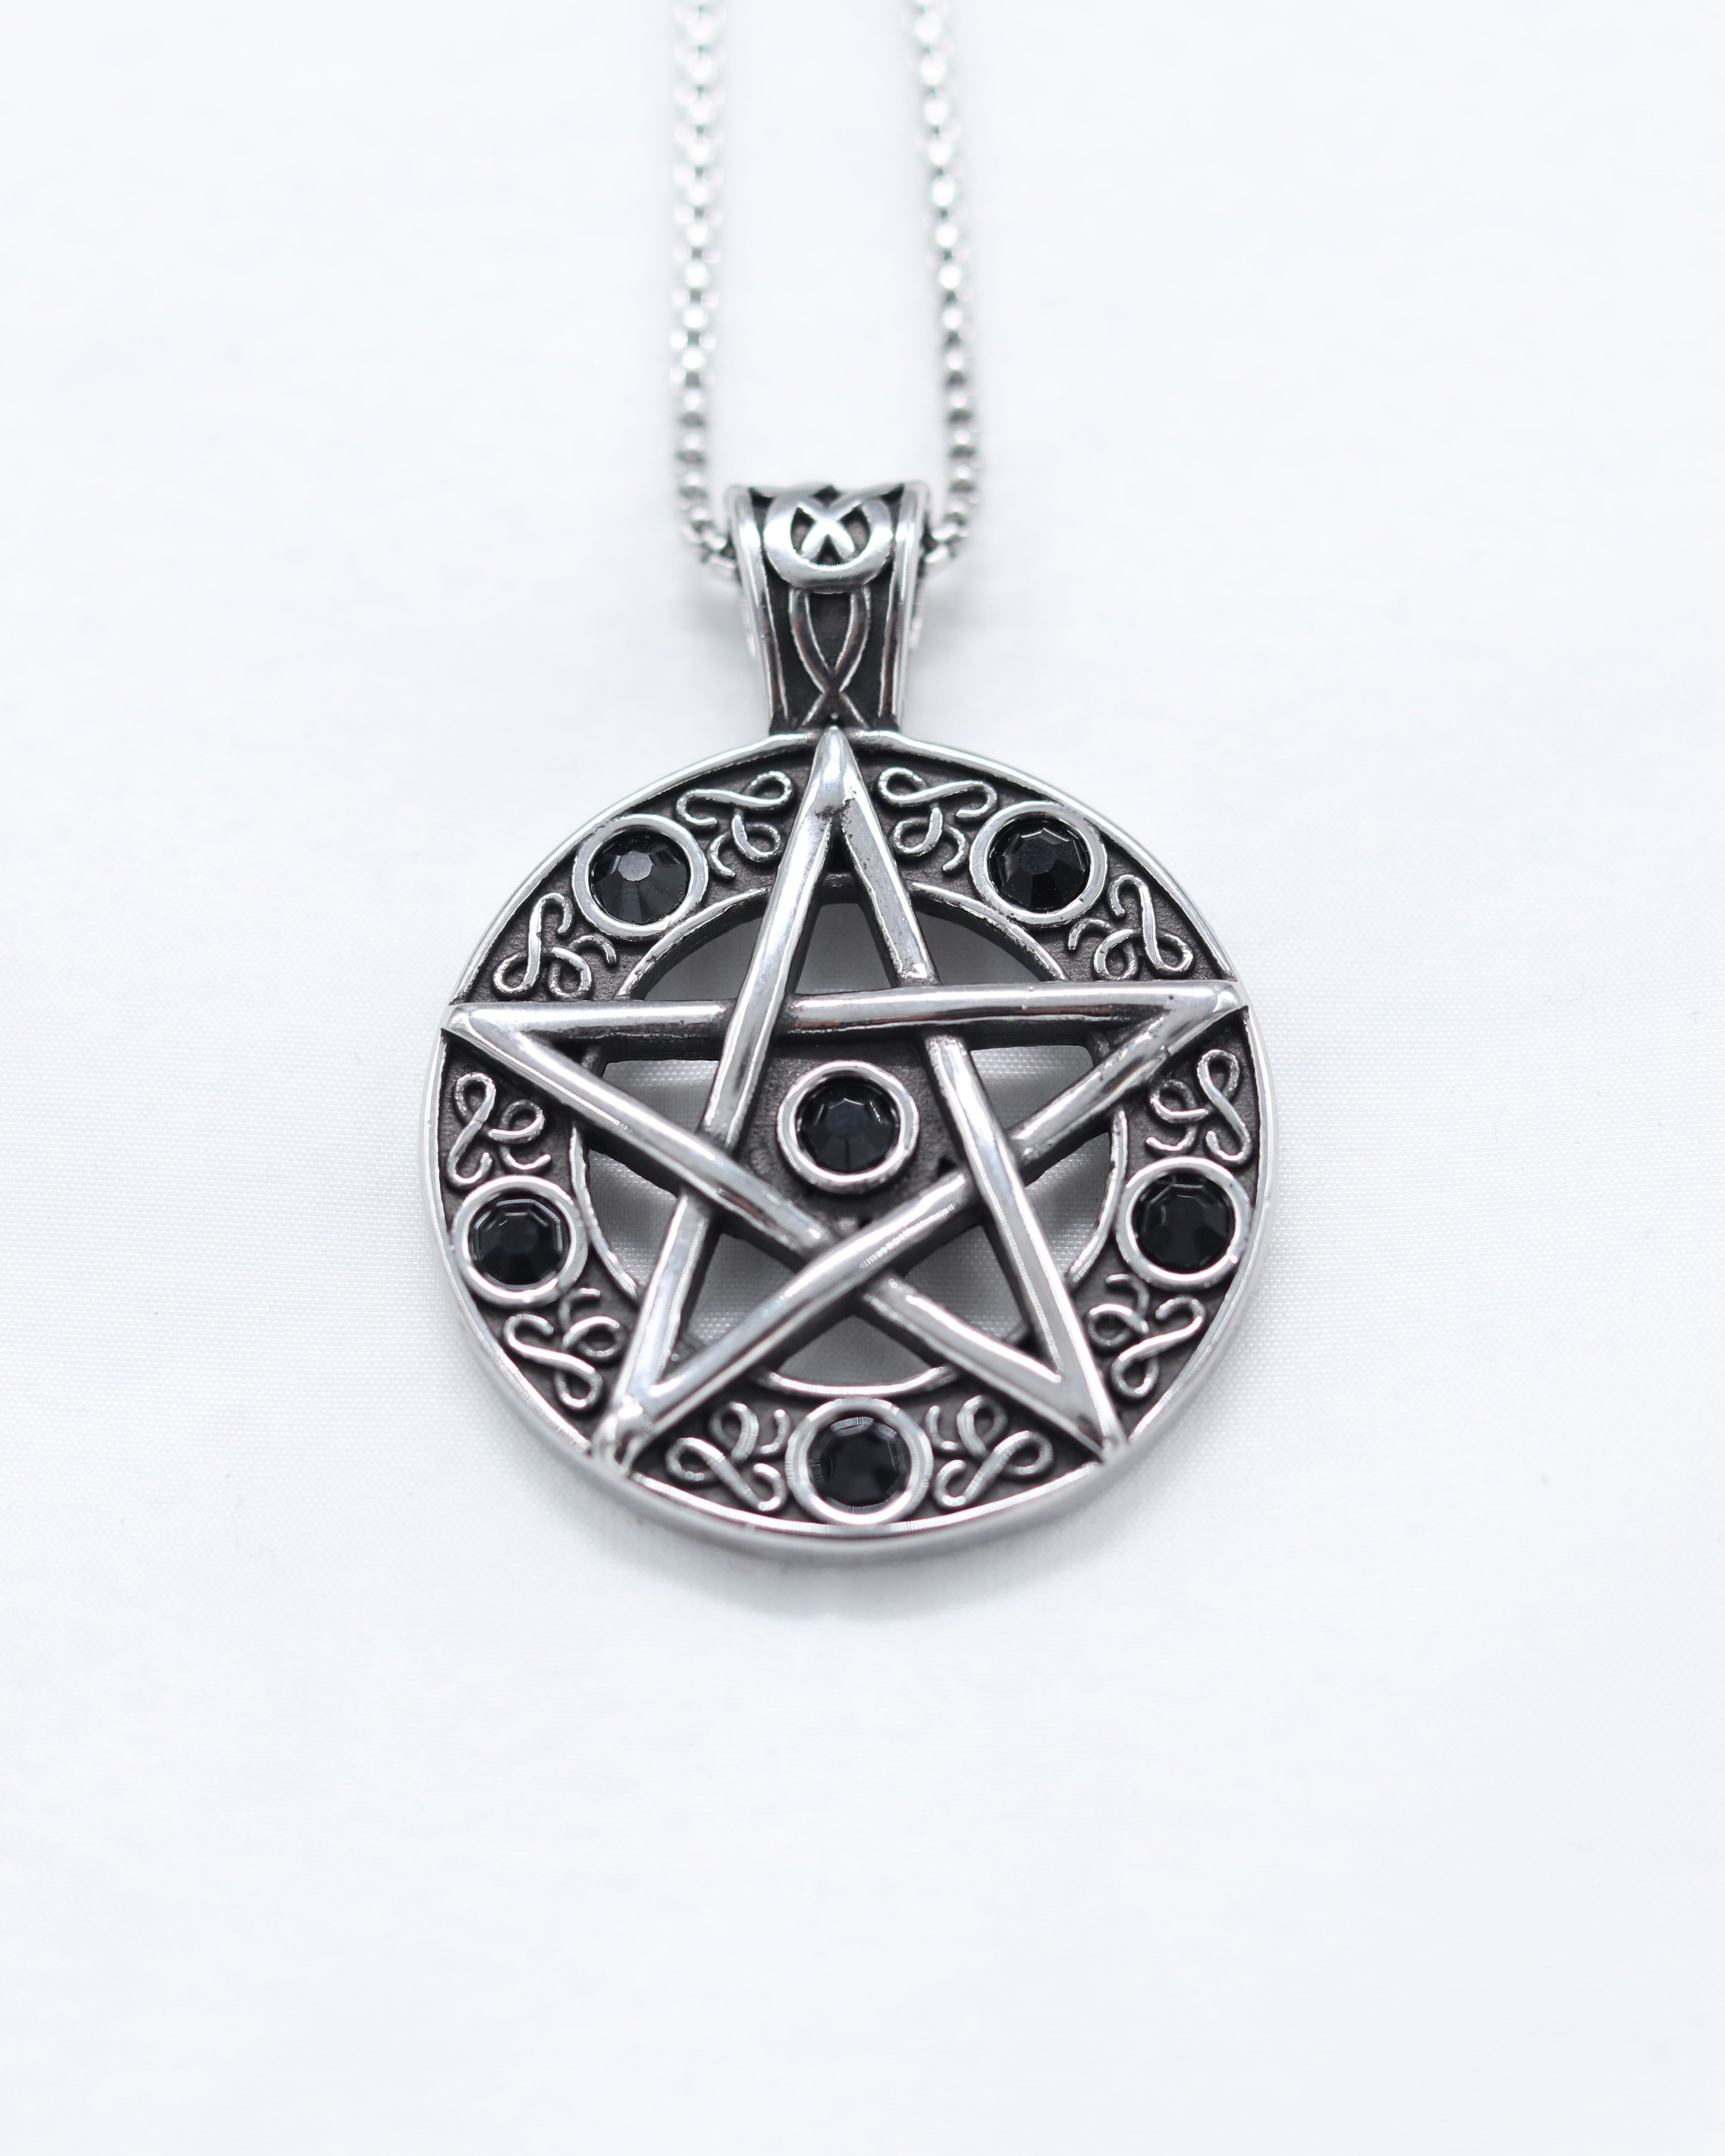 Shout Stainless Steel Devil Star Necklace